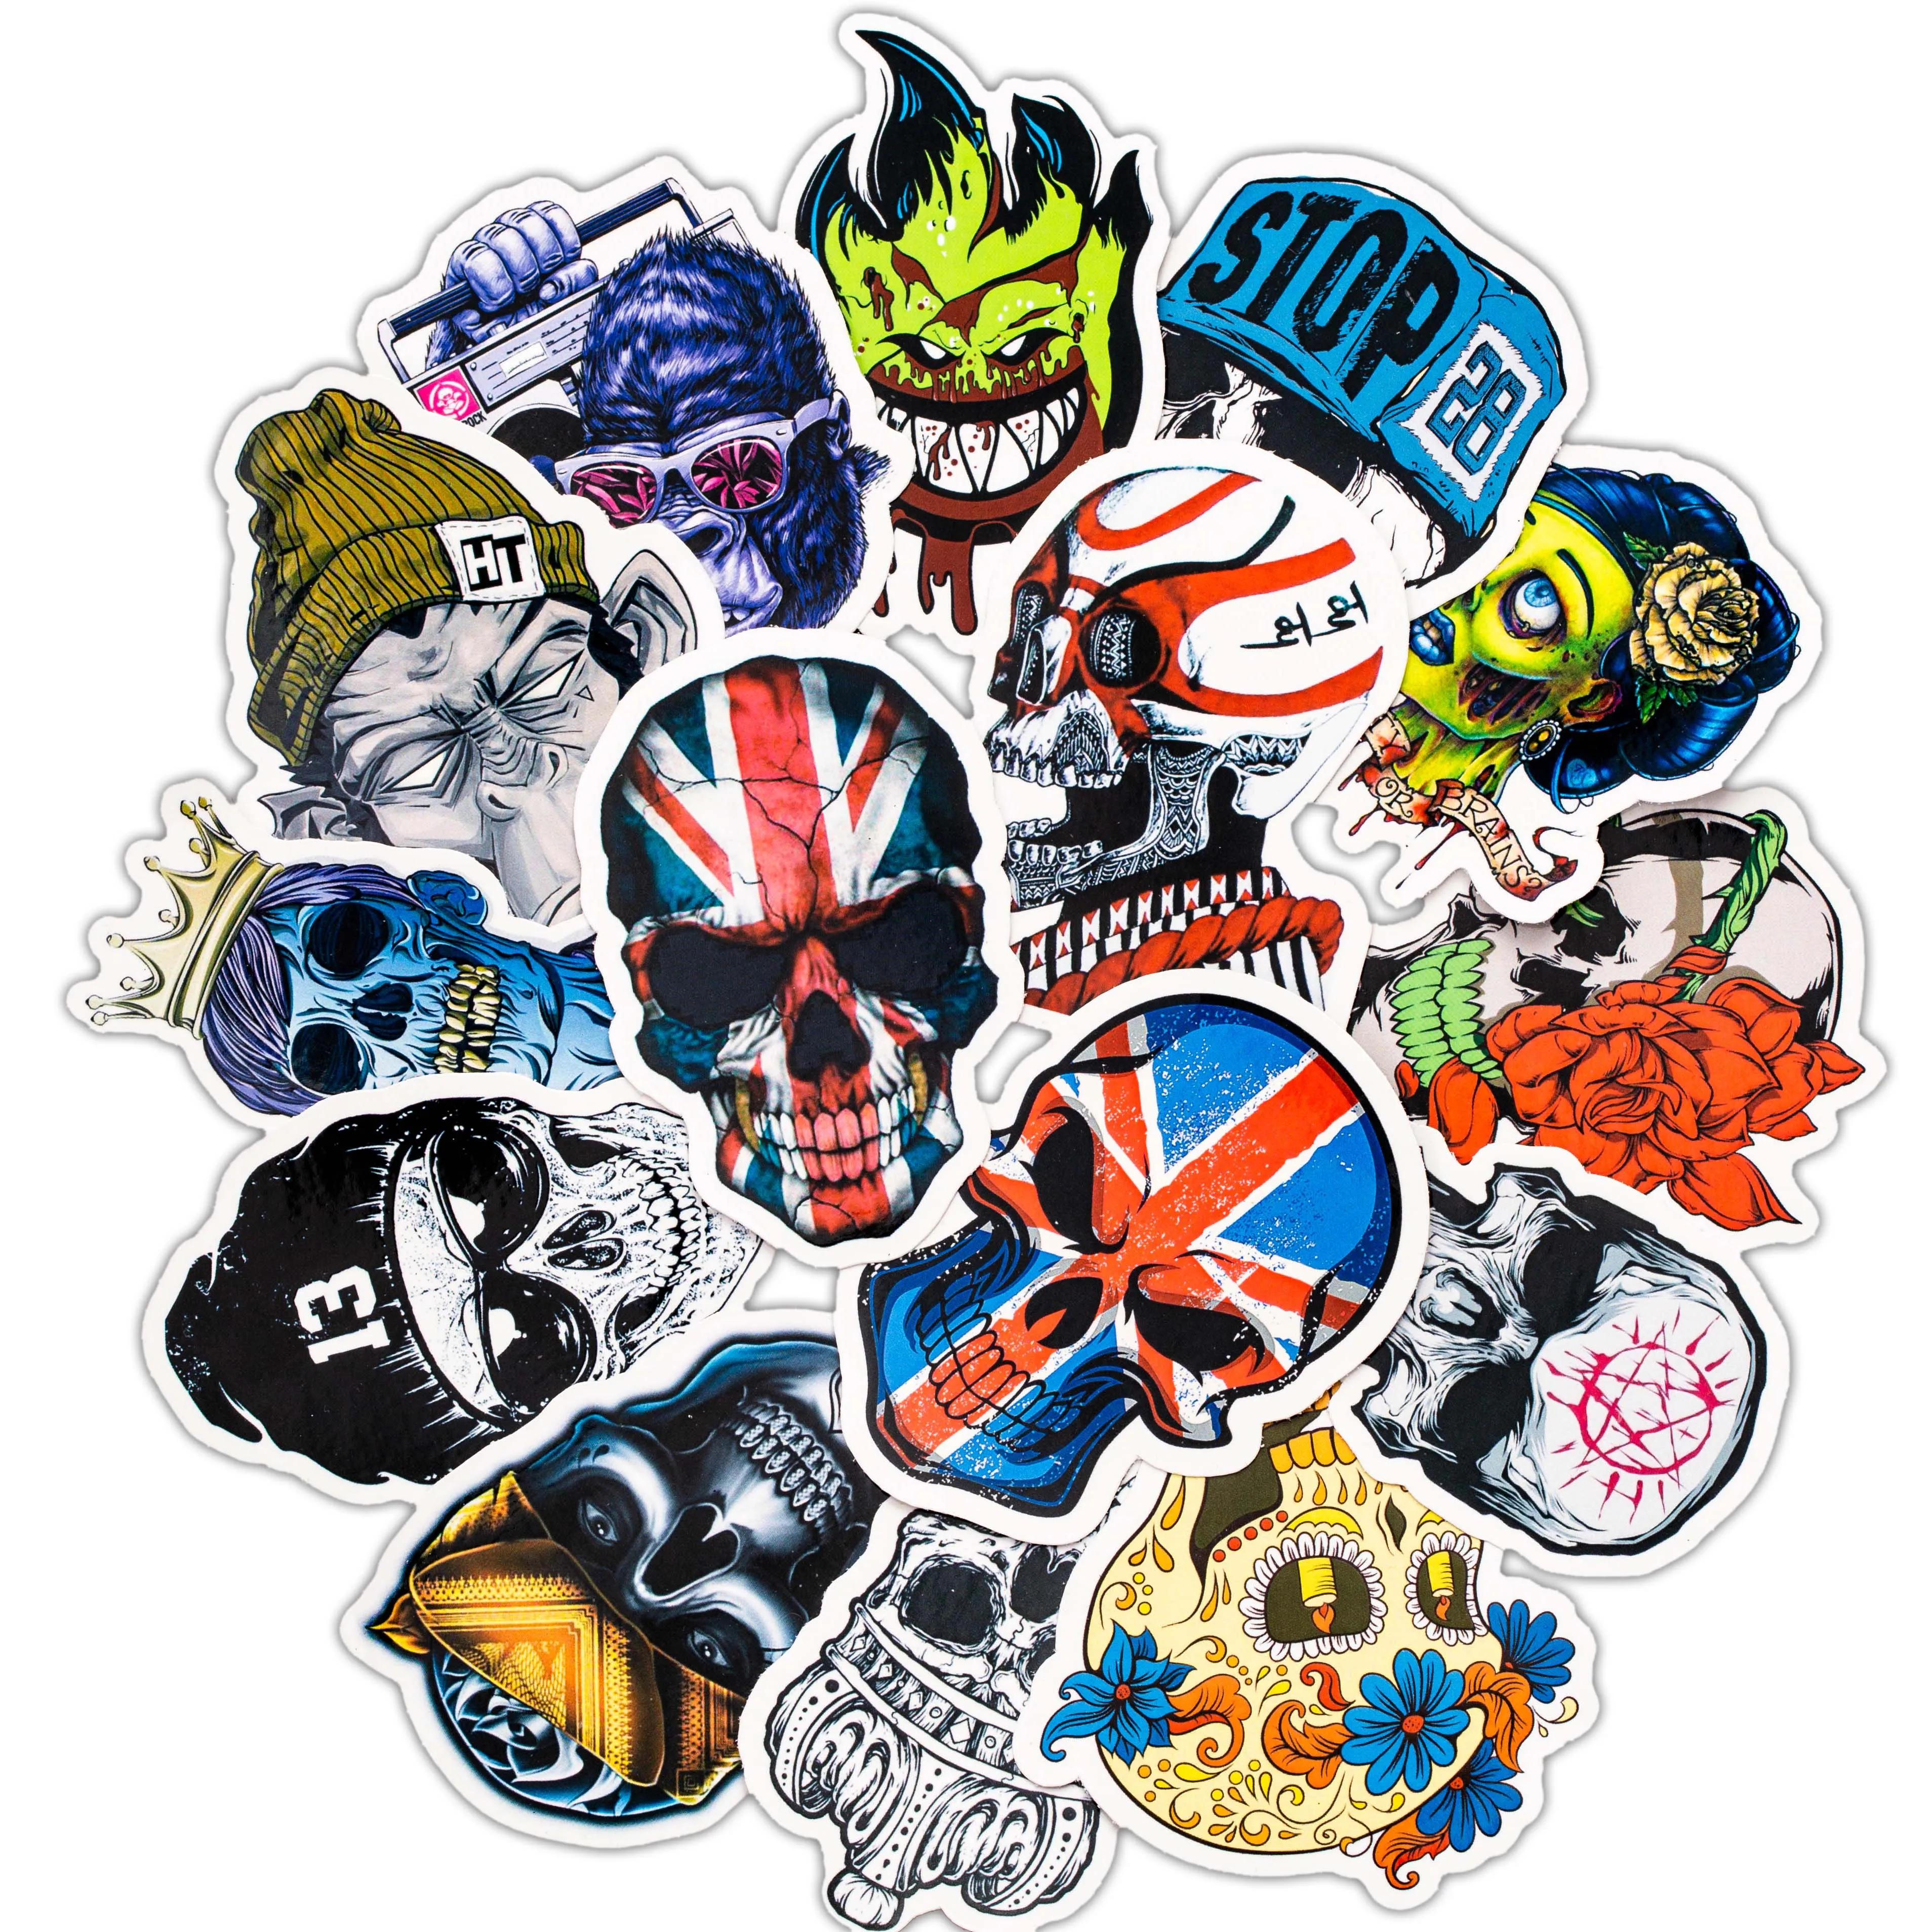 50Pcs Punk Cool Skull Sticker For Luggage Car Laptop Bicycle Motorcycle Notebook Laptop Toys Stickers Pack Sets 50pcs hunter x hunter adventure pvc waterproof sticker for luggage wall car laptop bicycle motorcycle notebook toys stickers